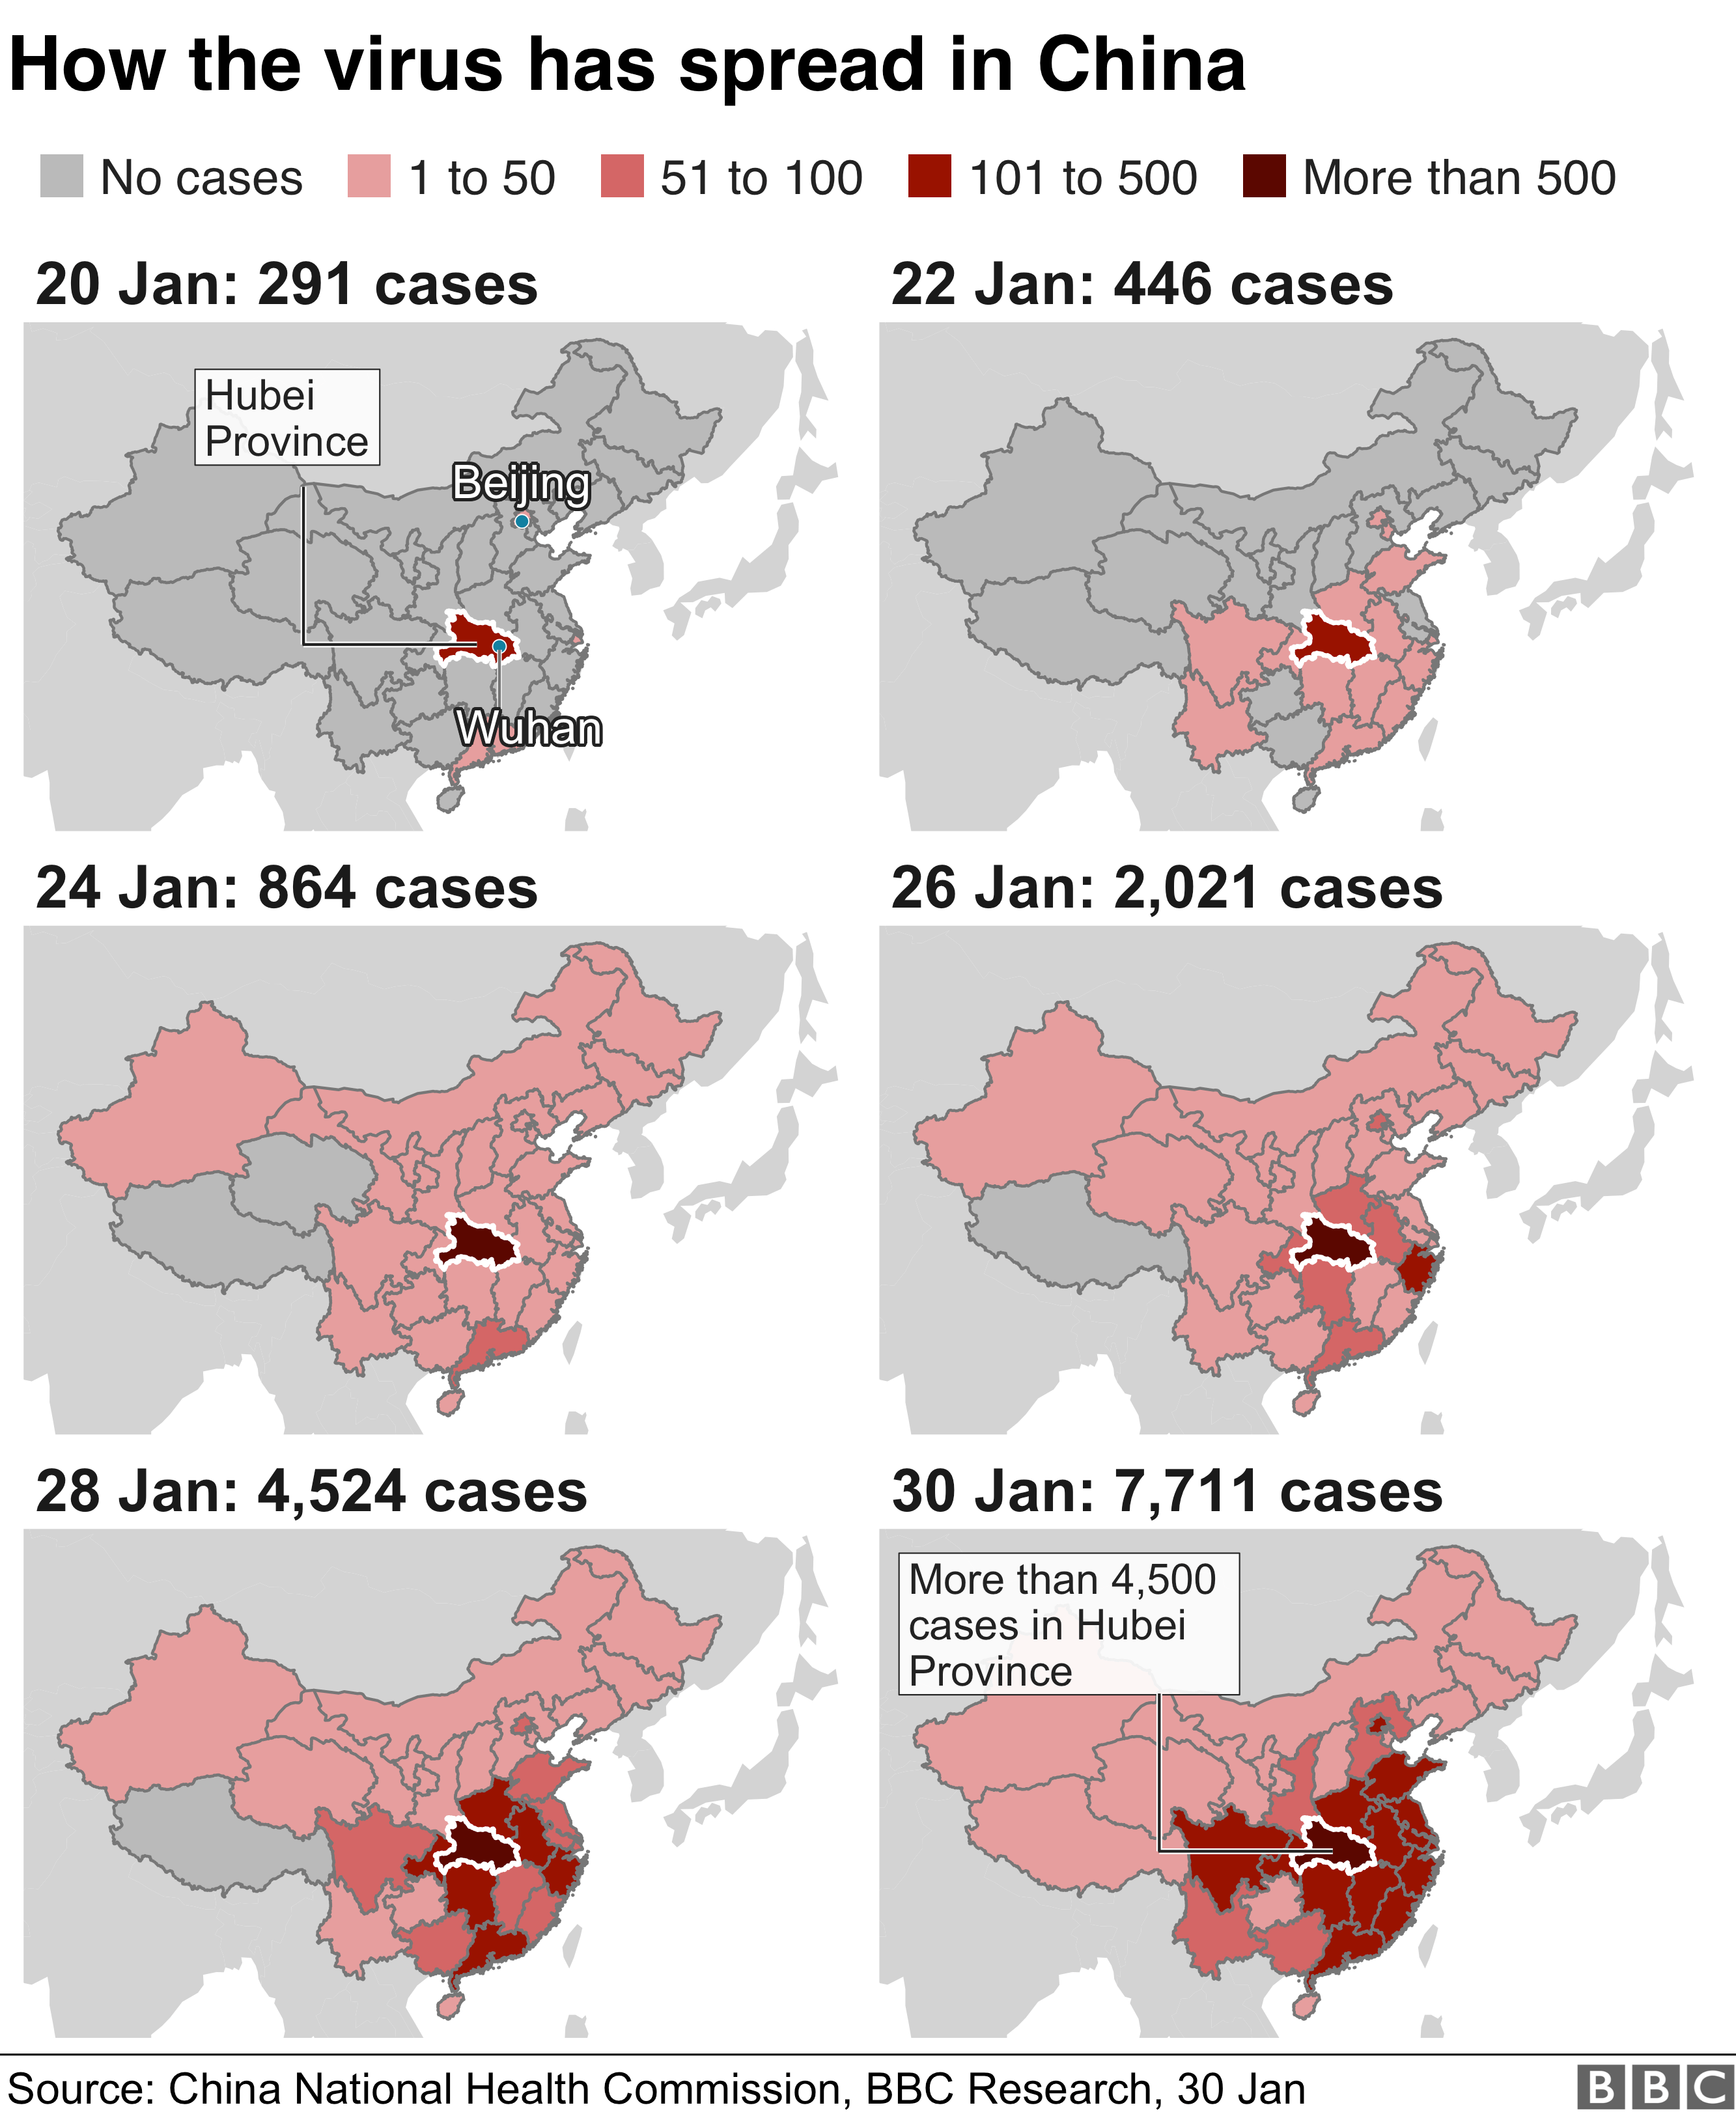 Coronavirus cases have spread to every province in China. There are now 7711 cases compared to 291 on 20 Jan. Hubei province has more than 4500 cases.